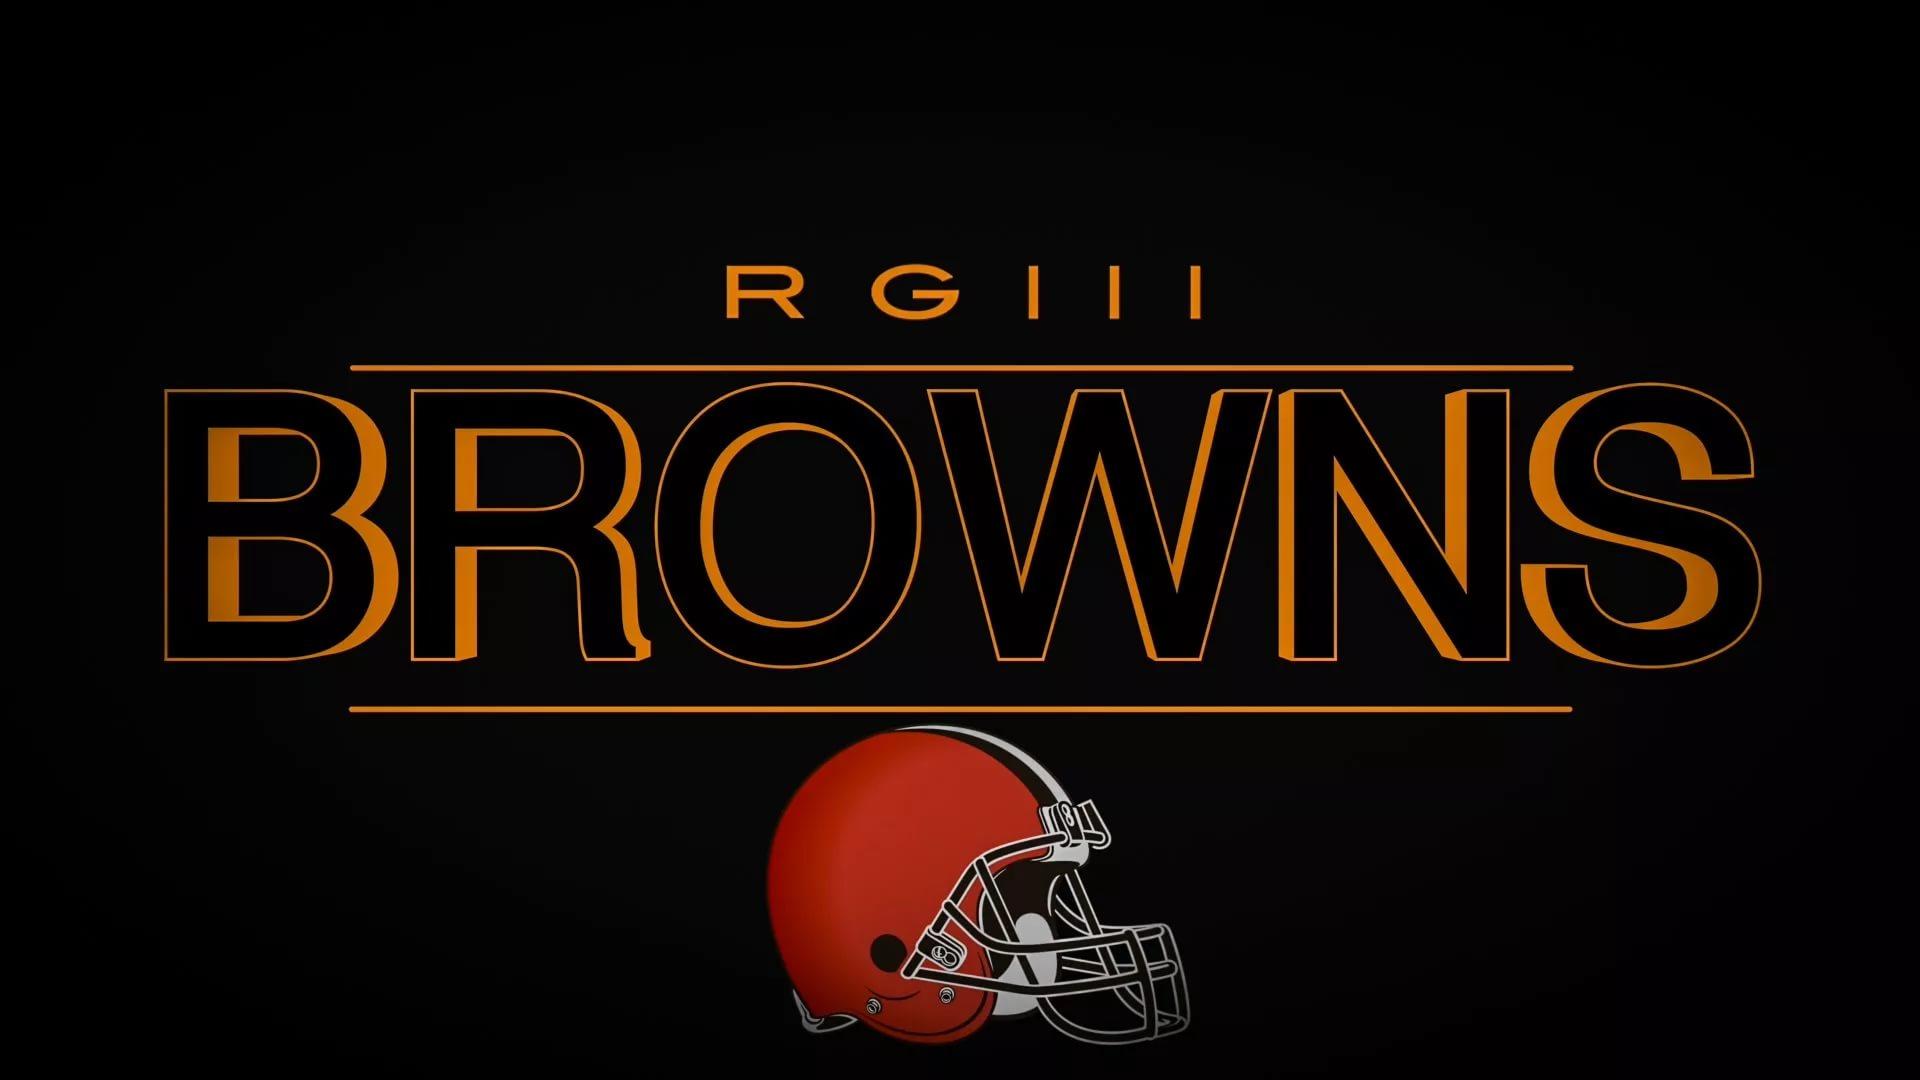 Cleveland Browns HD Wallpaper free